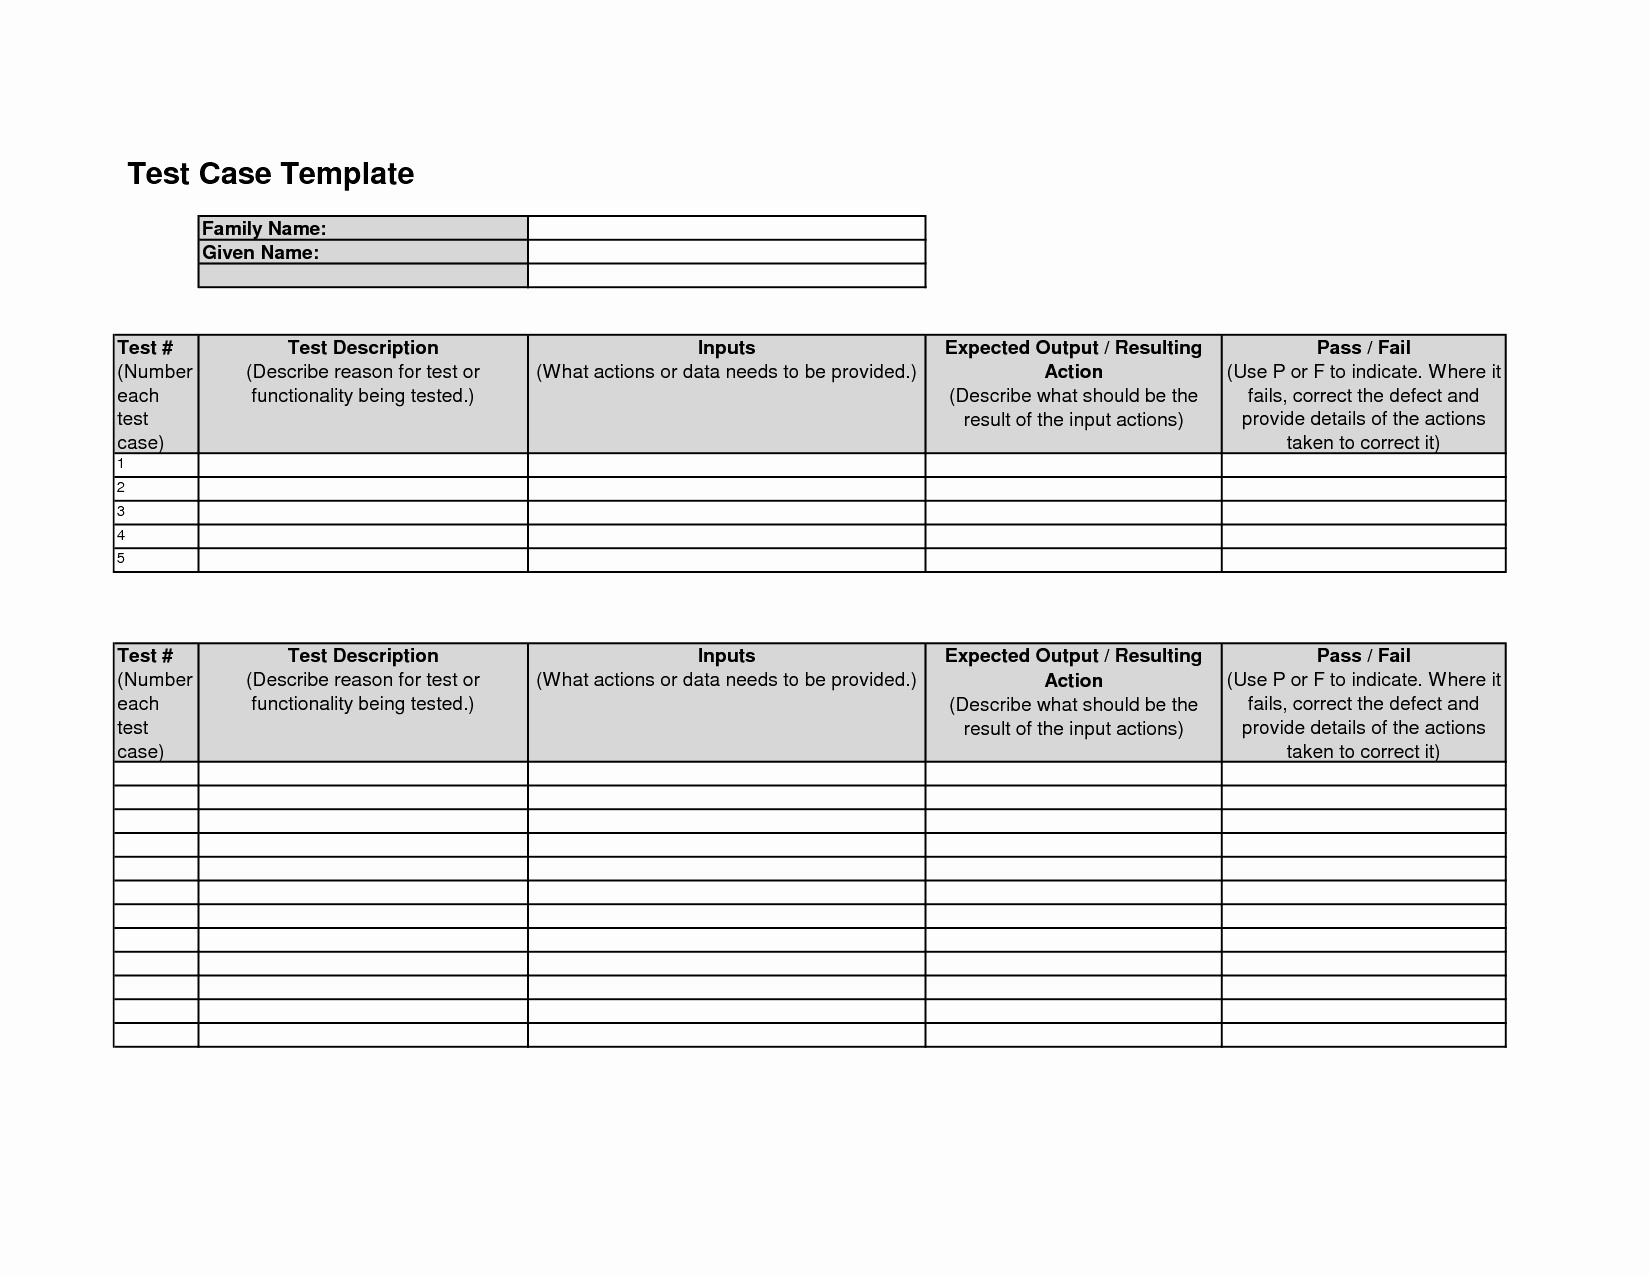 Ocr To Spreadsheet within Use Case Template Excel My Spreadsheet